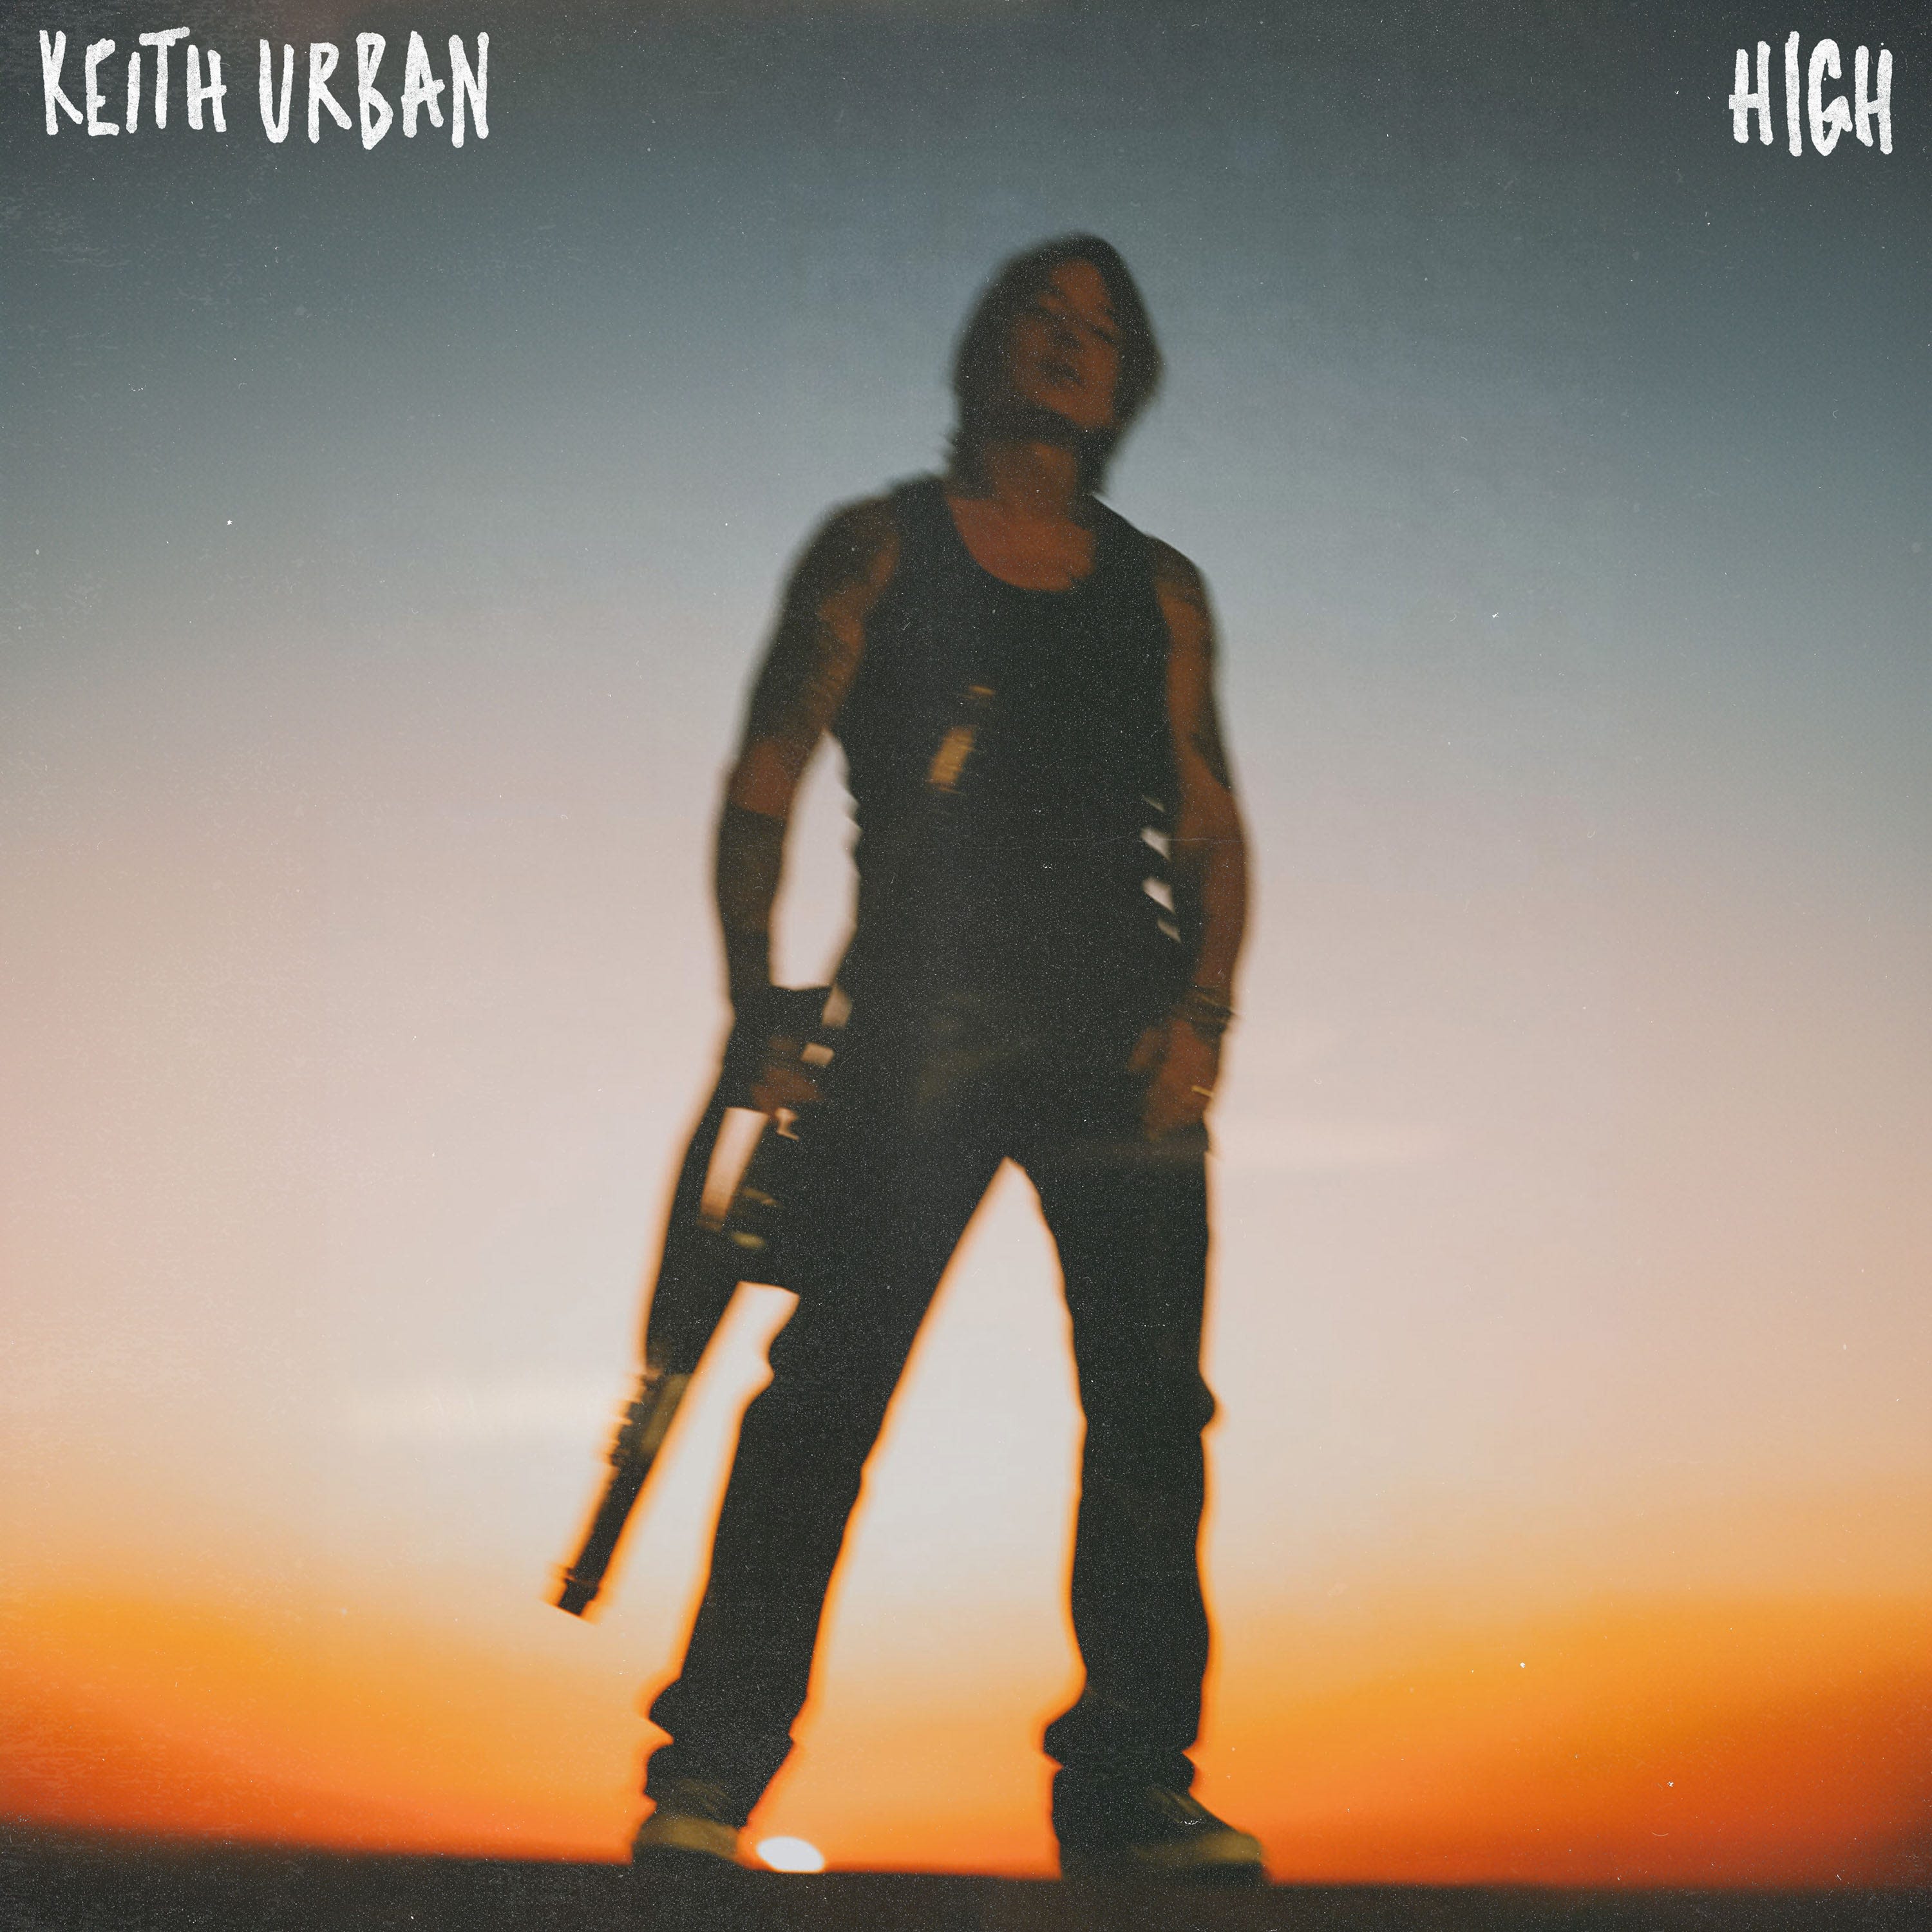 Keith Urban announces his latest album 'HIGH,': Here's when it will come, how to get it